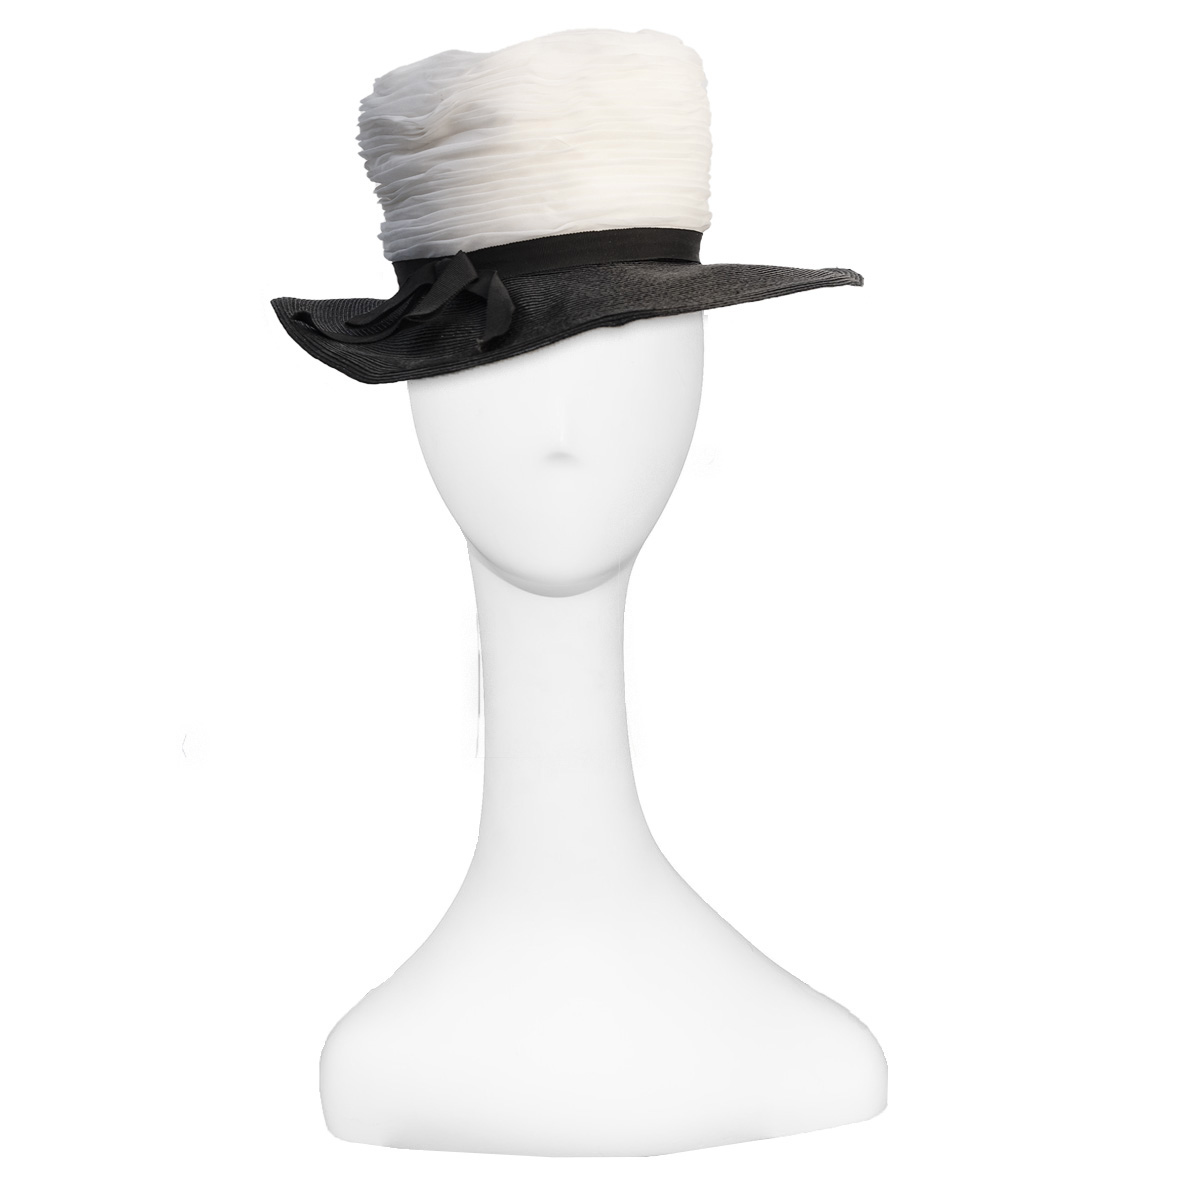 1960s black and white hat